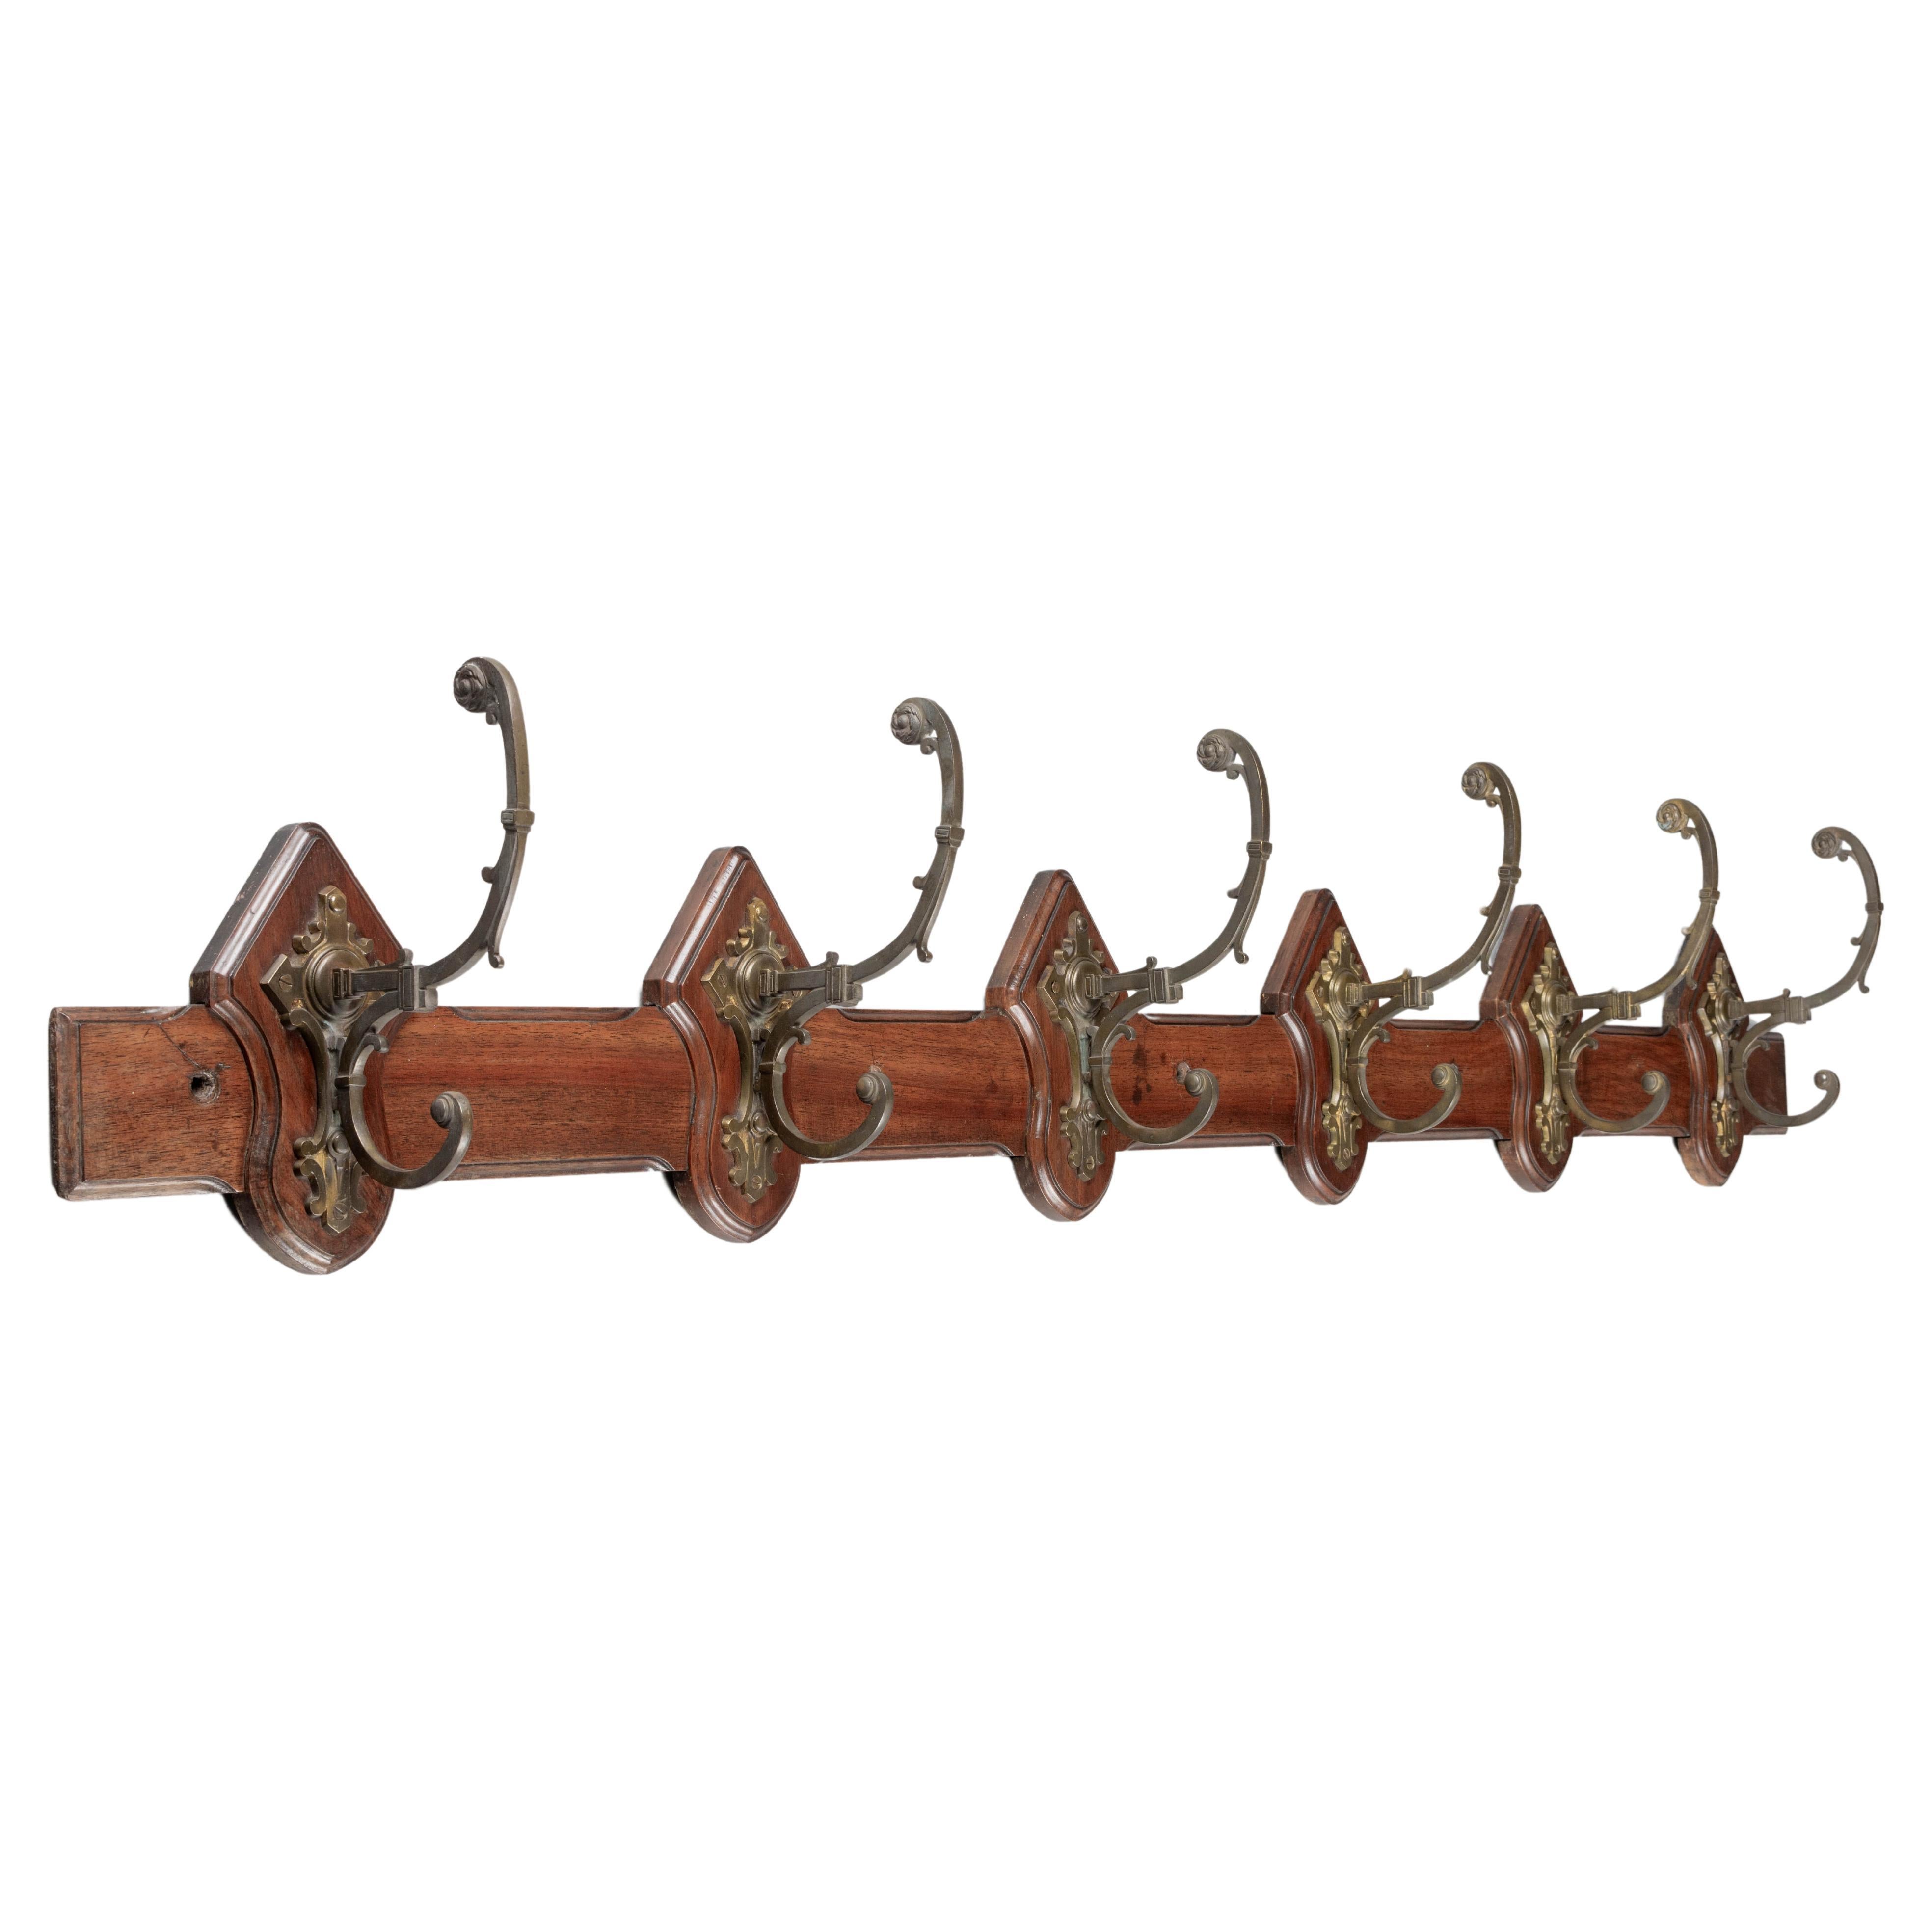 French Mahogany Porte Manteau or Coat Rack For Sale